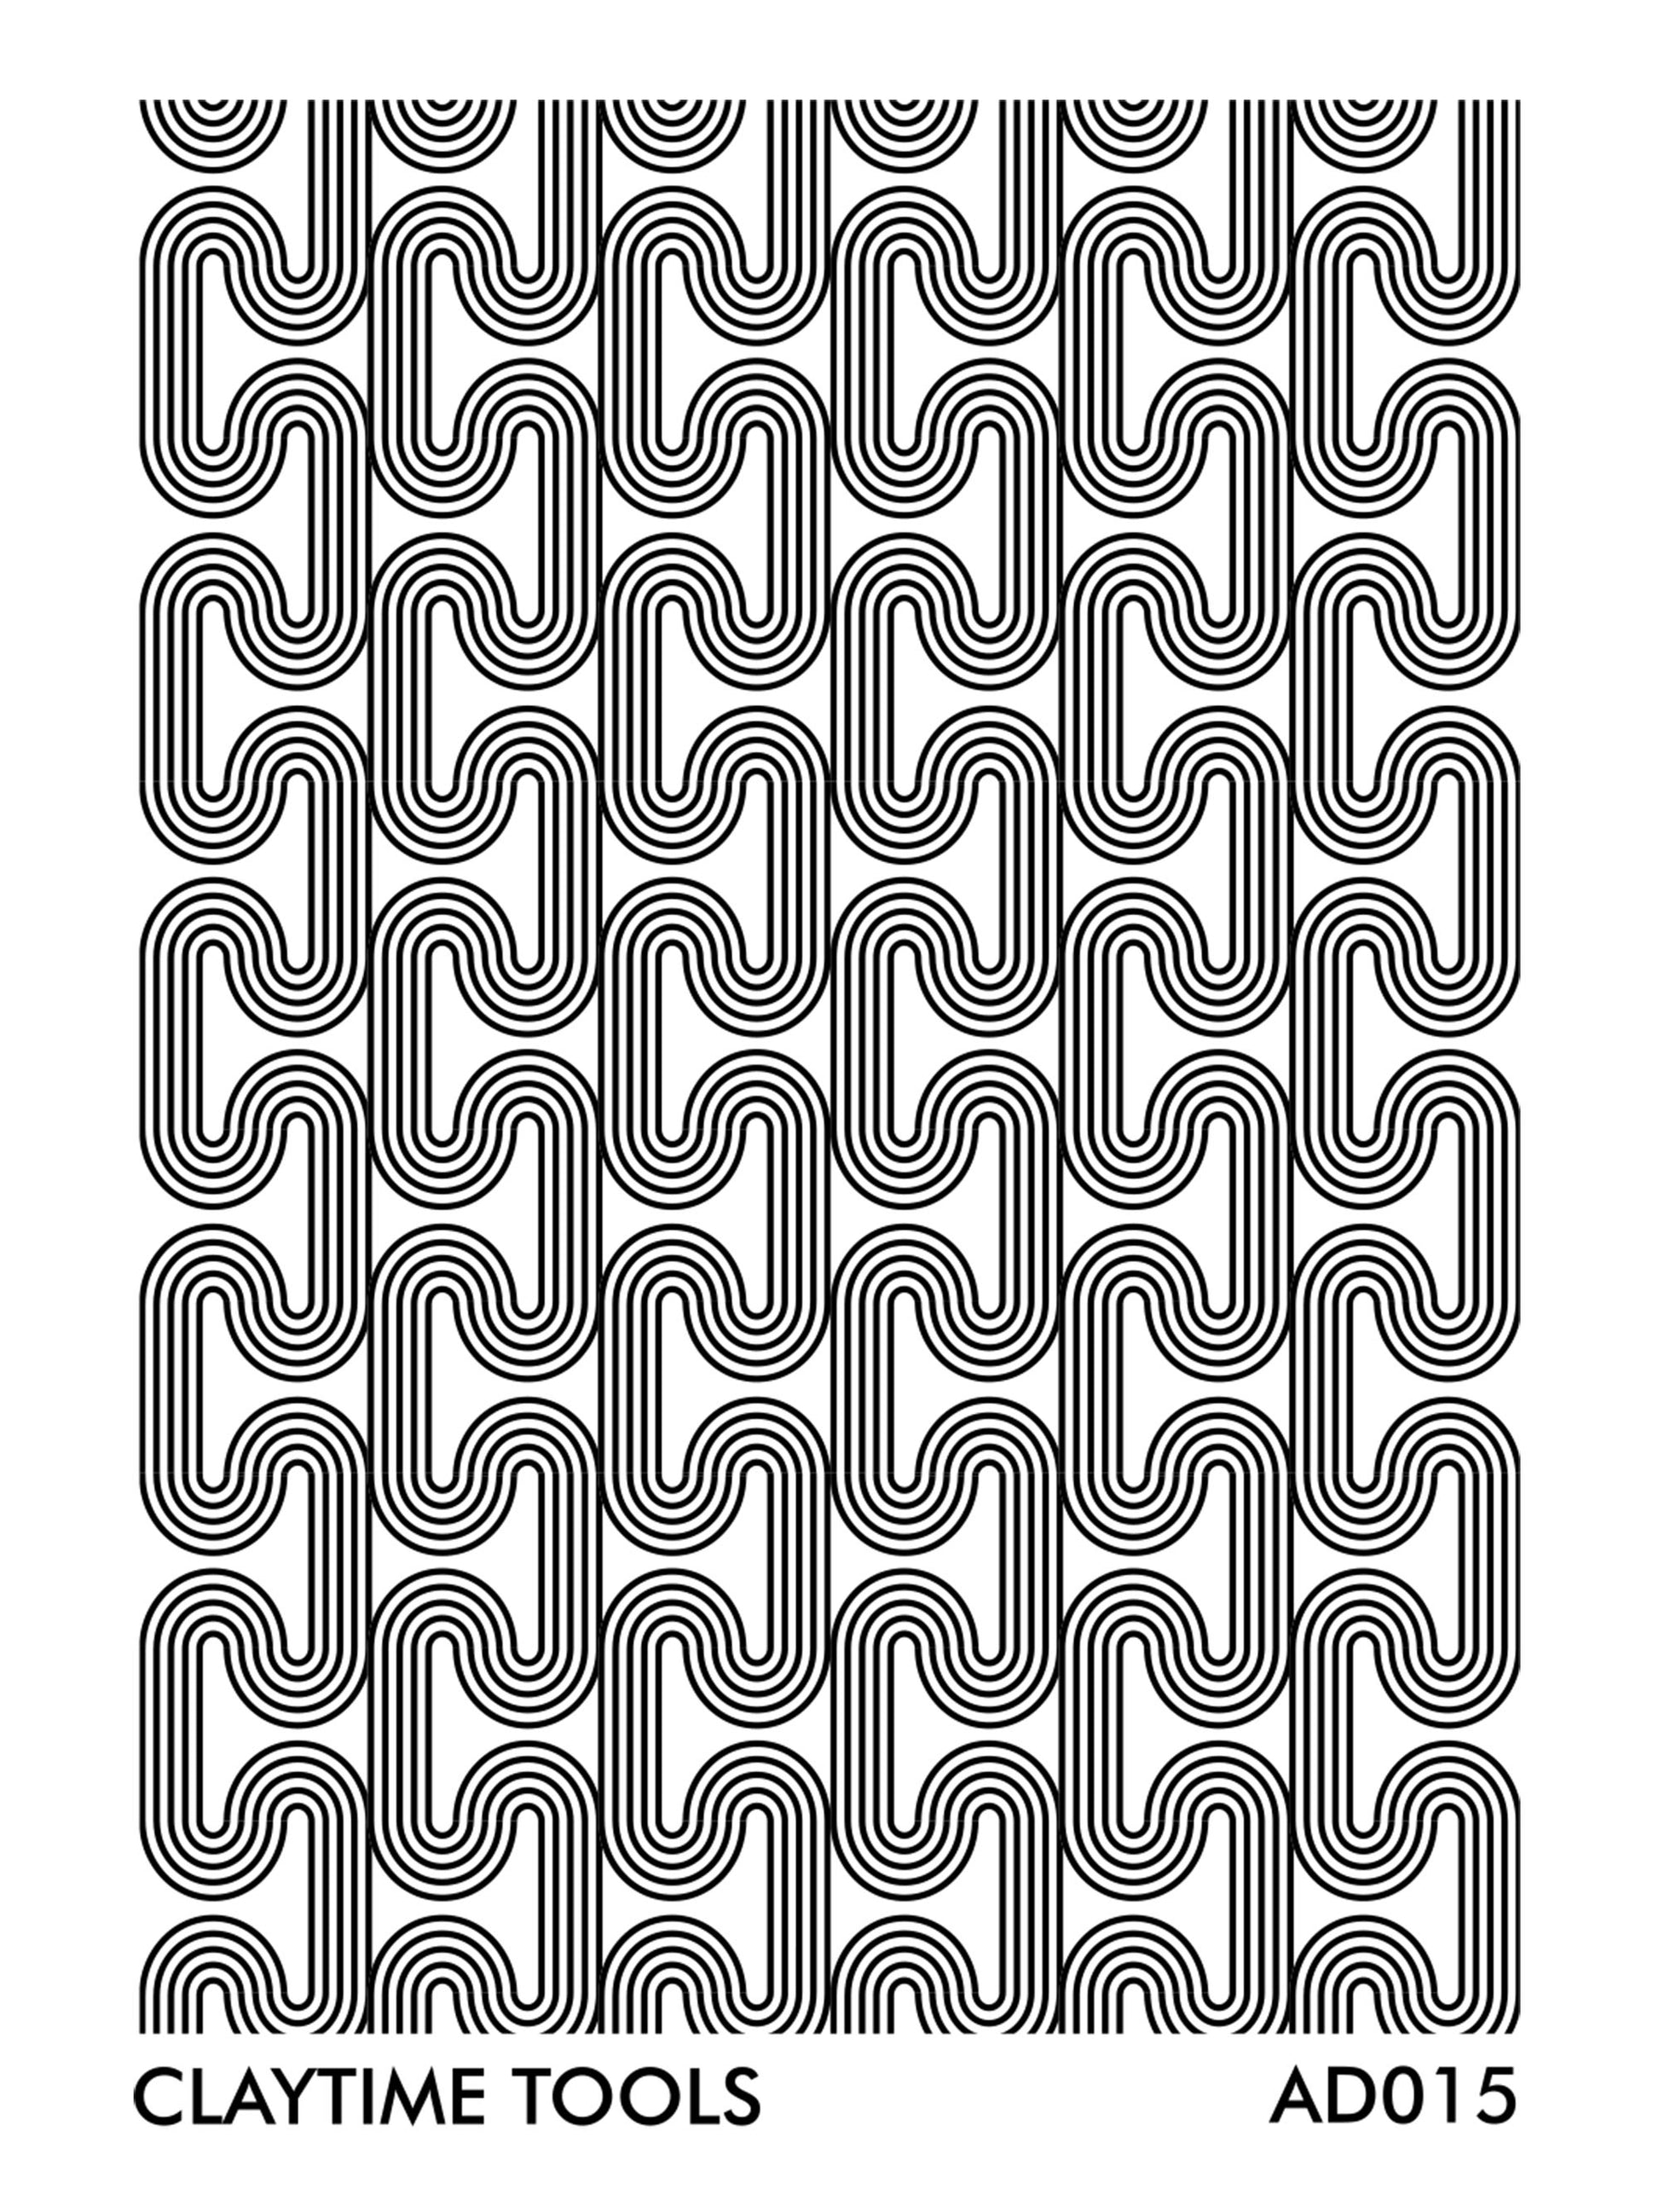 Art deco tubes motif in a white background.